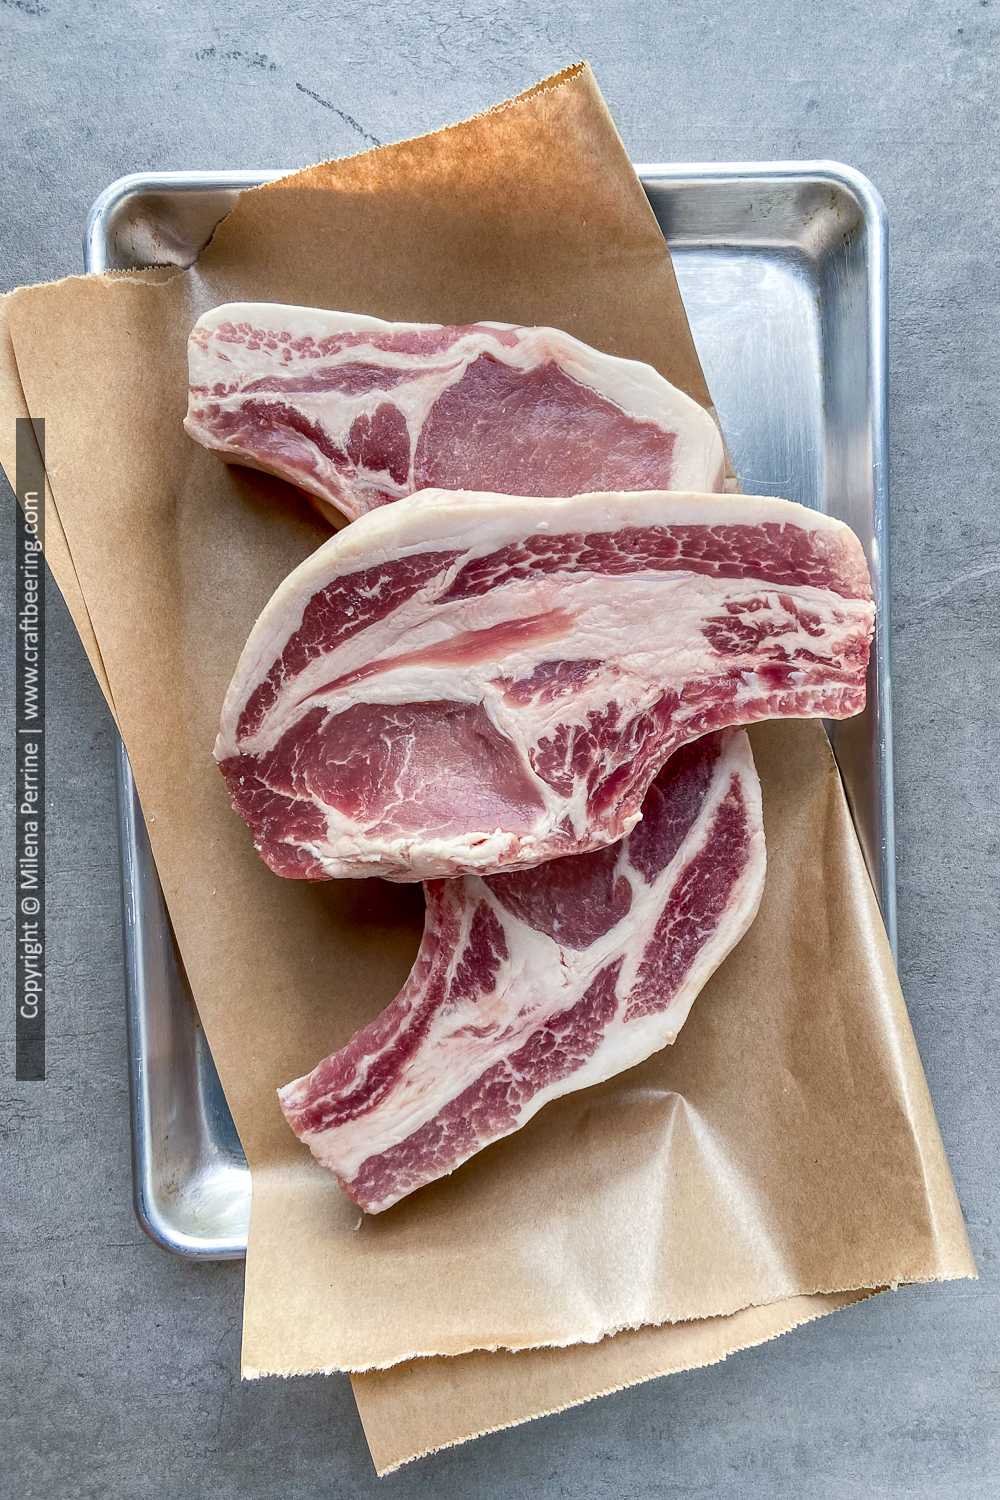 Raw thick bone-in pork chops are perfect for smoked bone in pork chops.